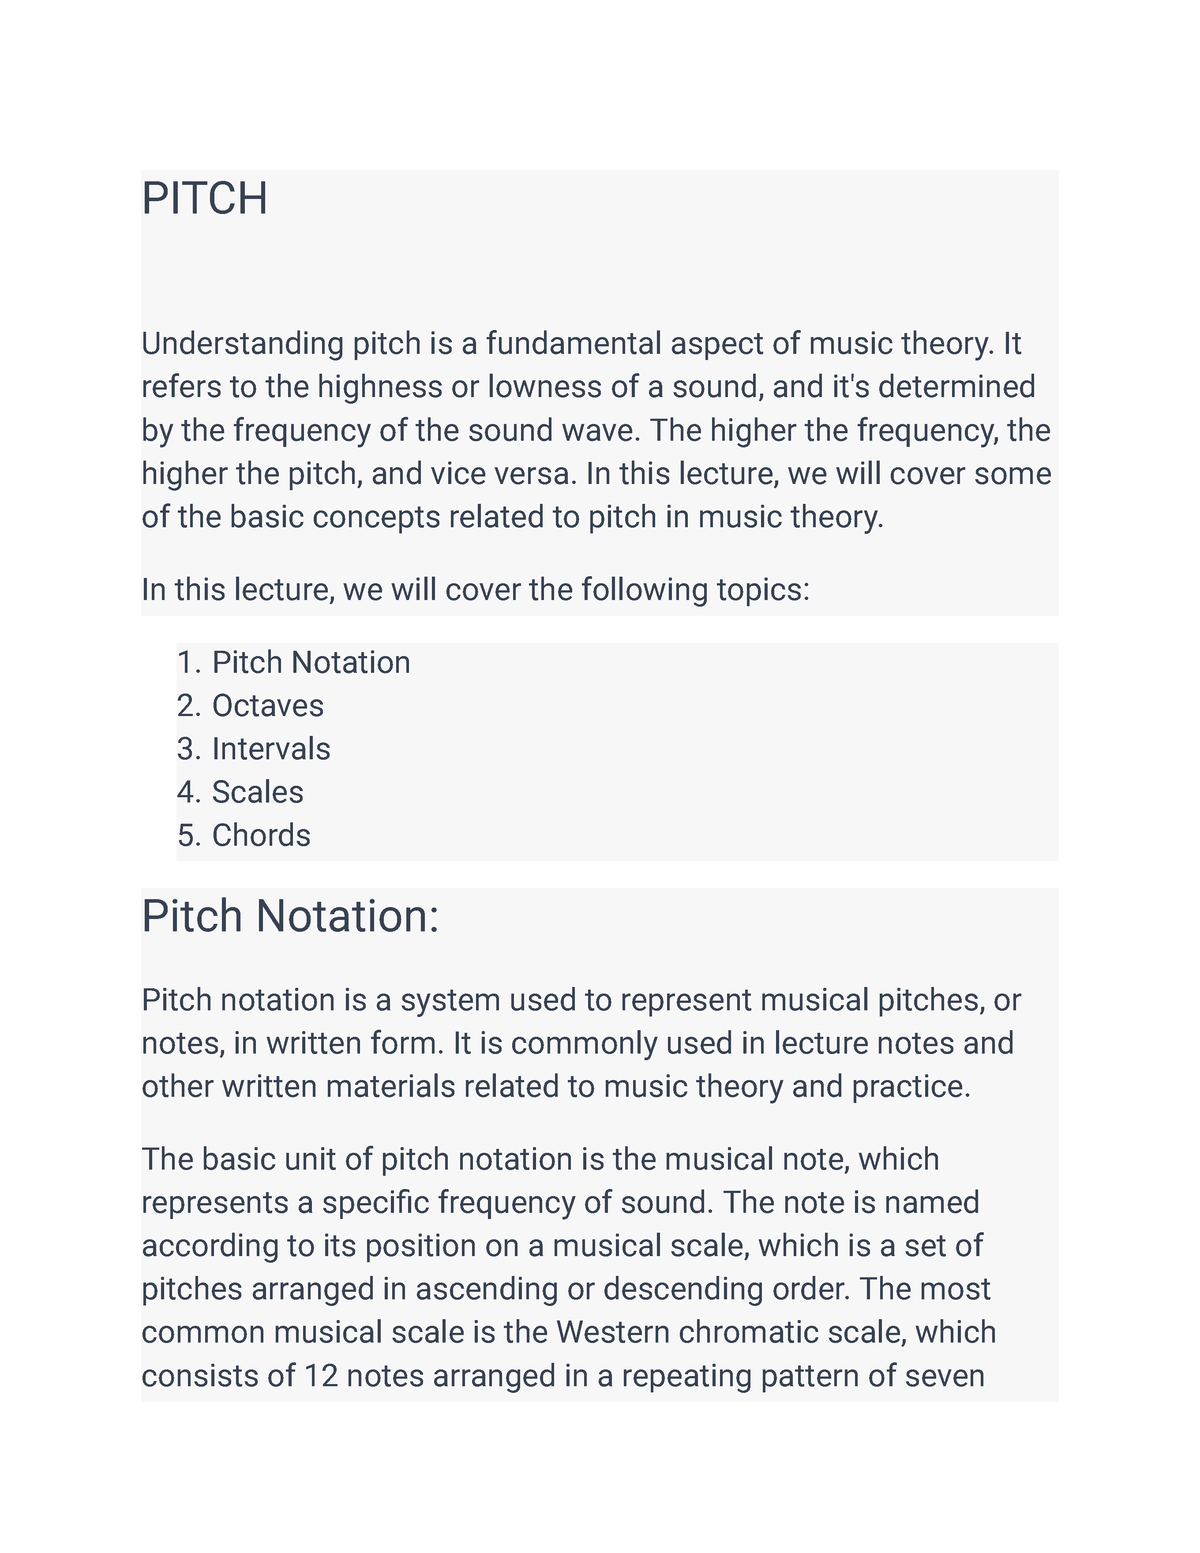 Notation in music theory - PITCH Understanding pitch is a fundamental ...